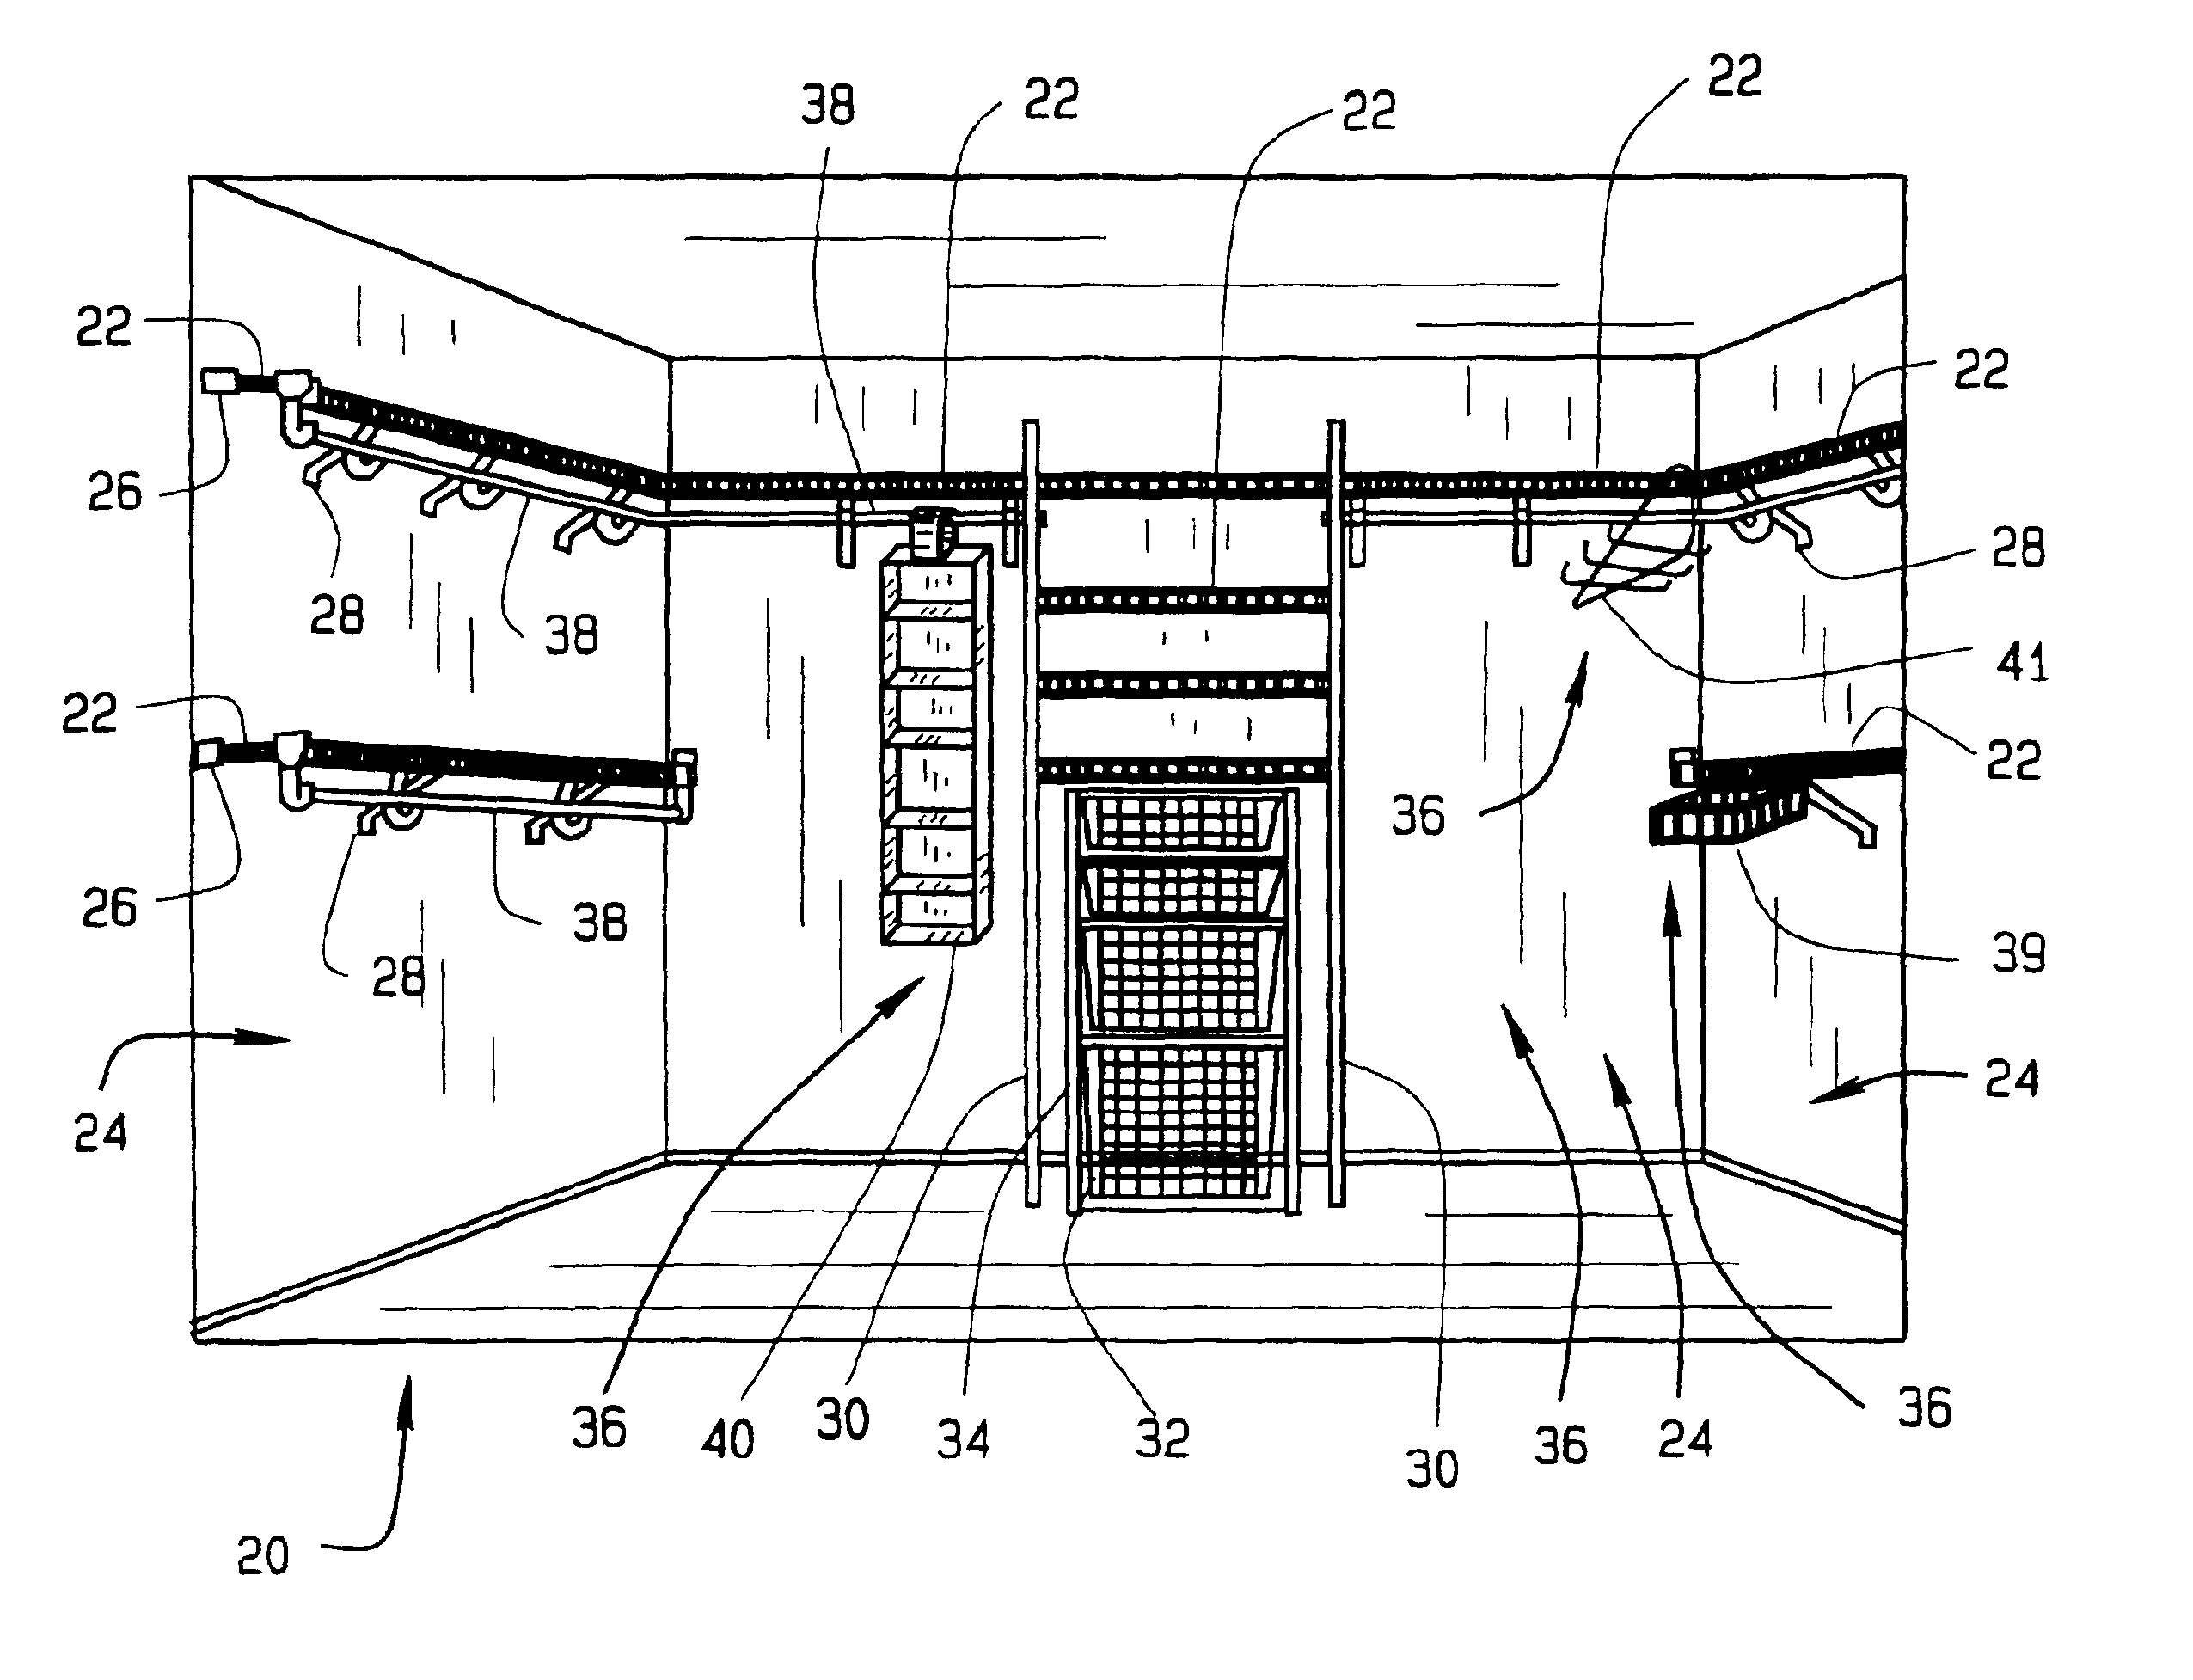 Attachment device for shelving and organizer systems